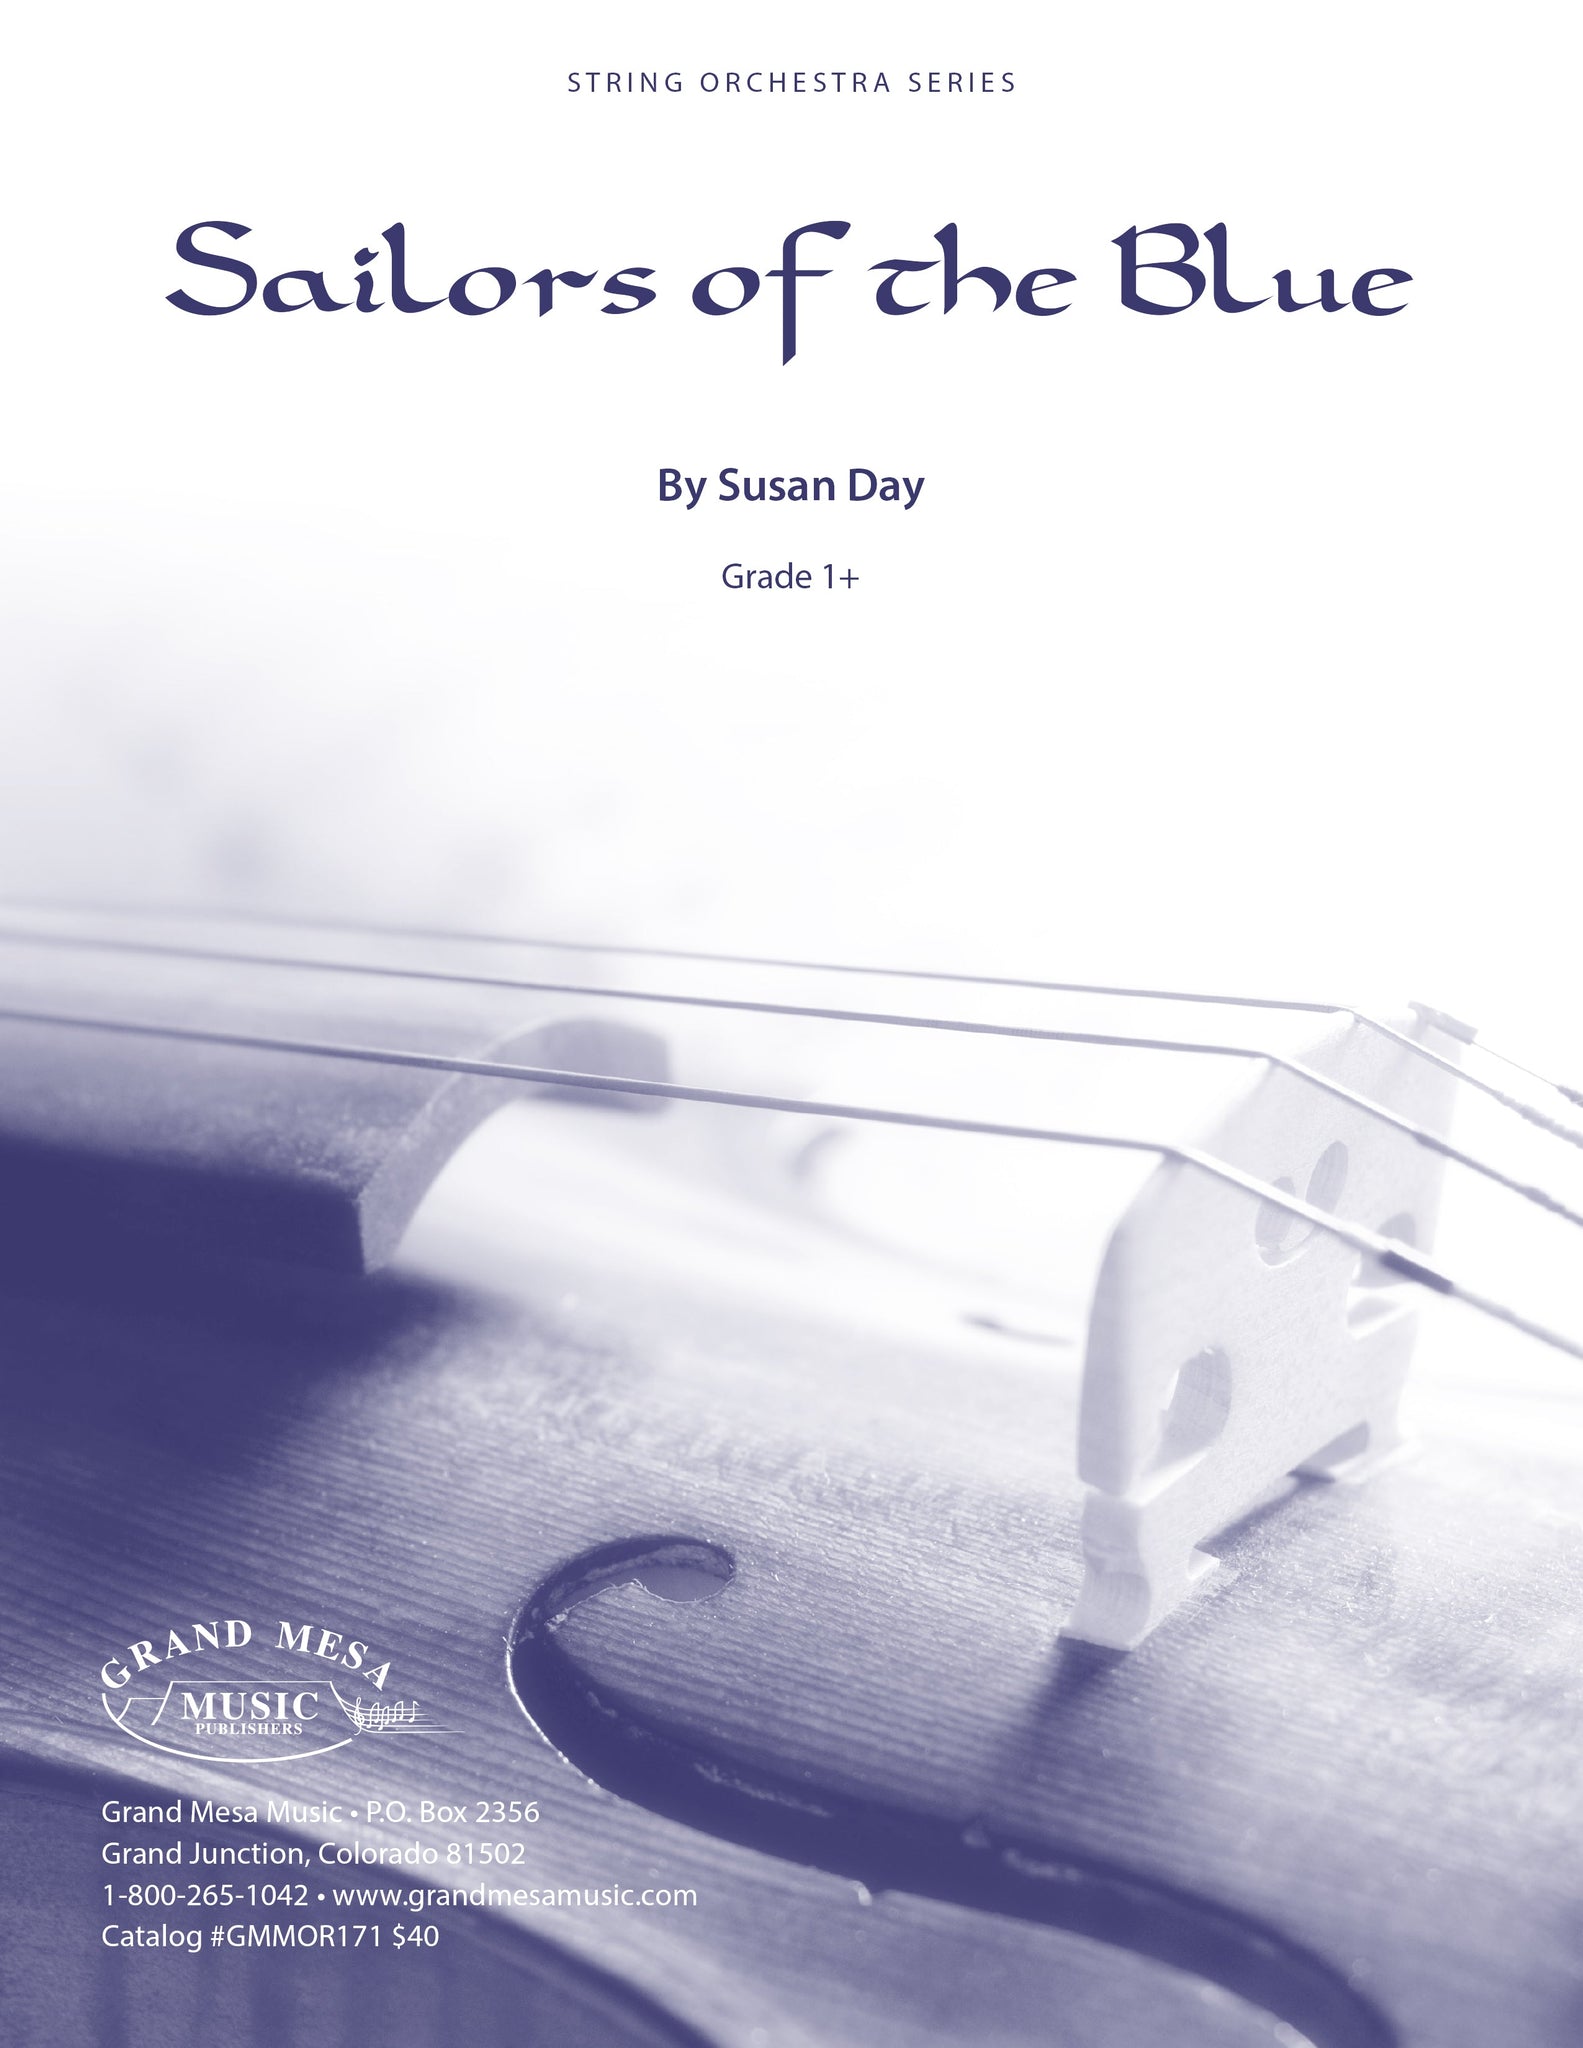 Strings sheet music cover of Sailors of the Blue, composed by Susan Day.